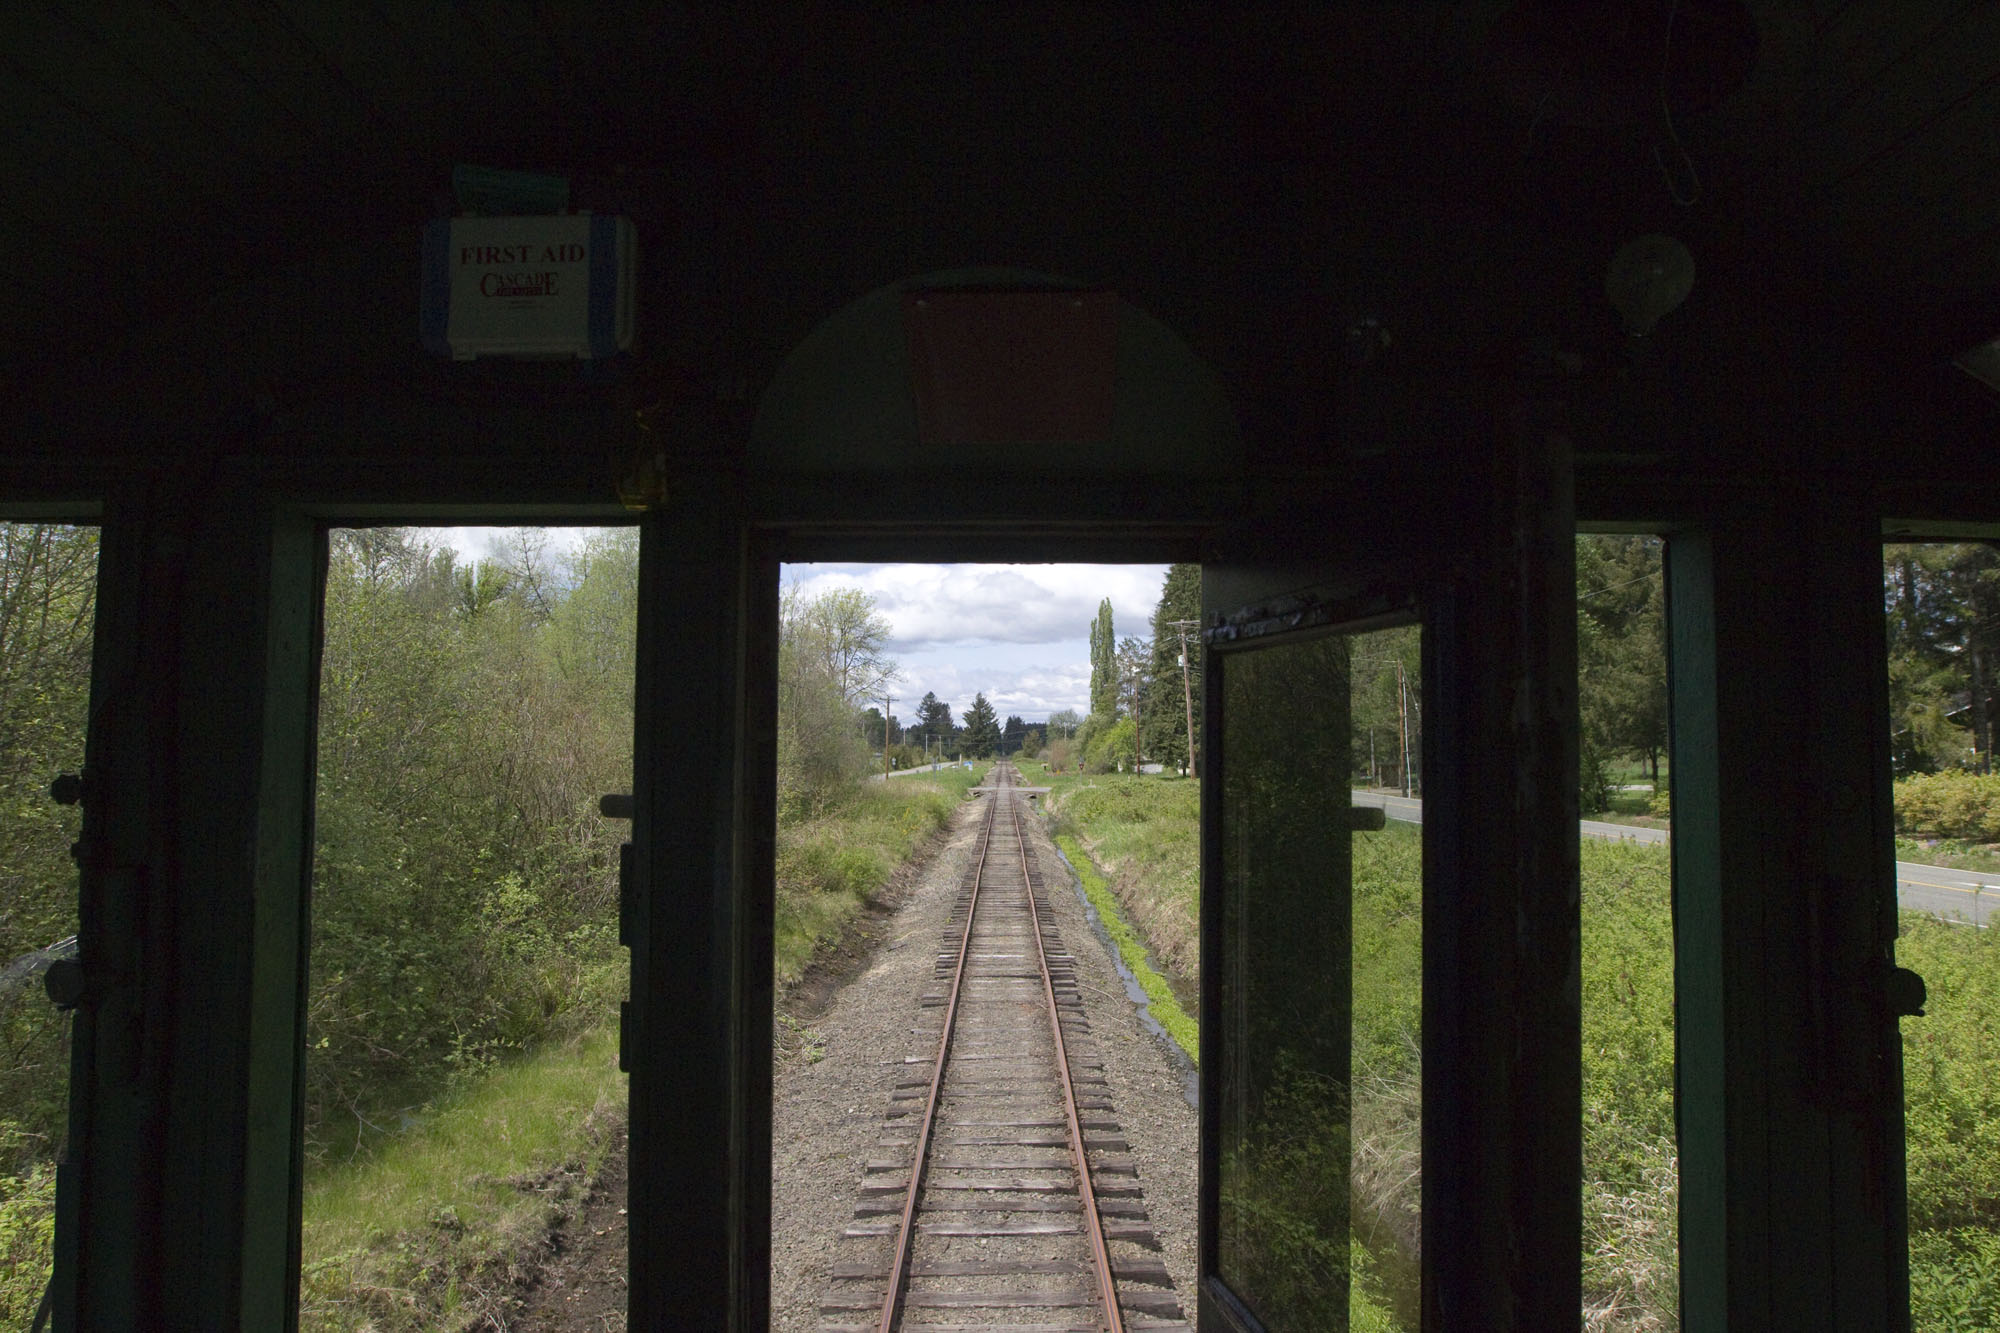 A view from the engine on the Chelatchie Prairie Railroad train in May 2014.